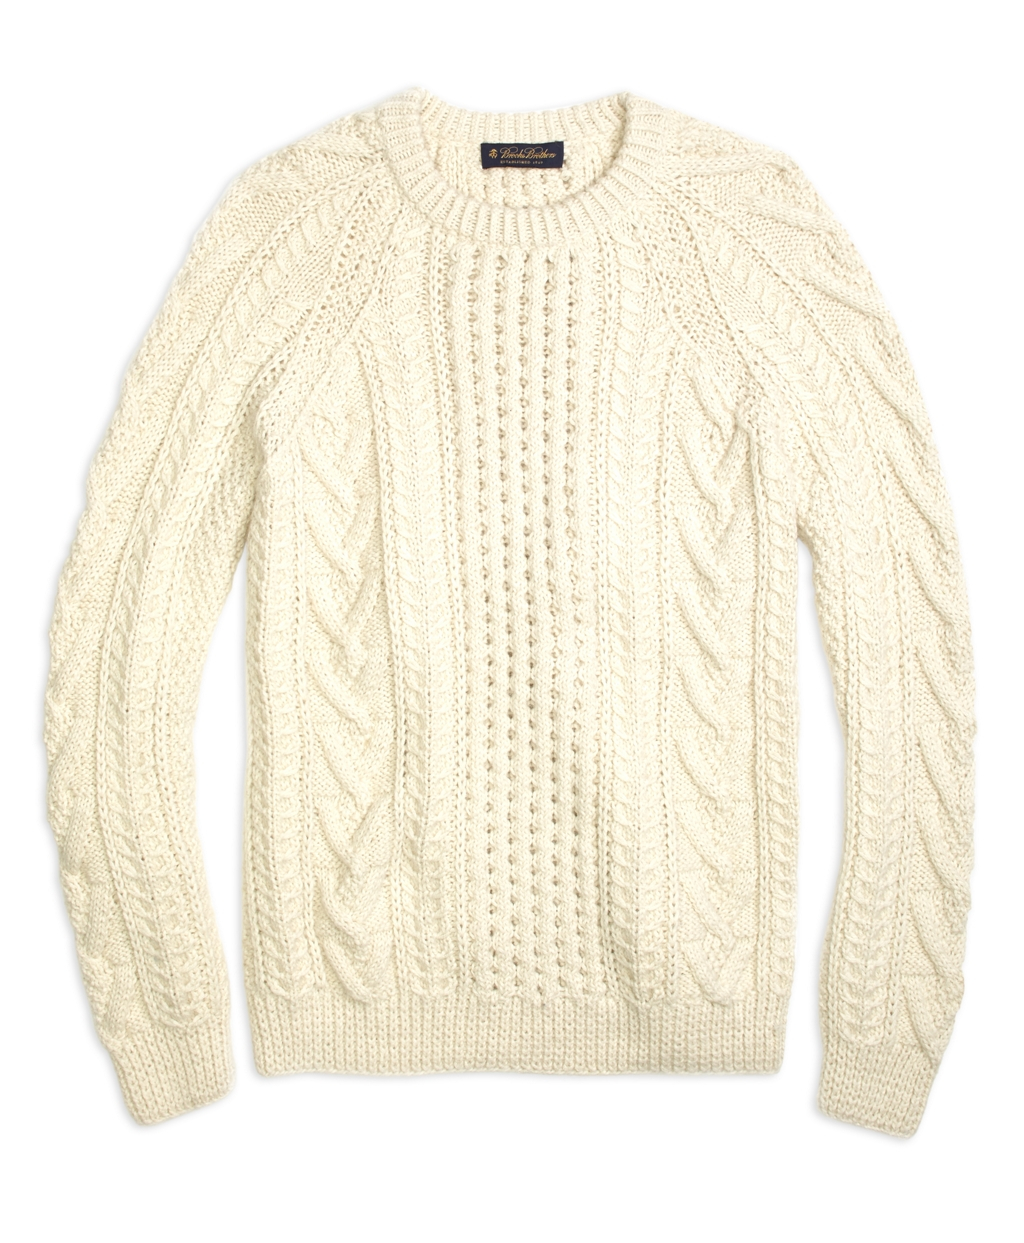 Lyst - Brooks Brothers Handknit Aran Cable Crewneck Sweater in White for Men